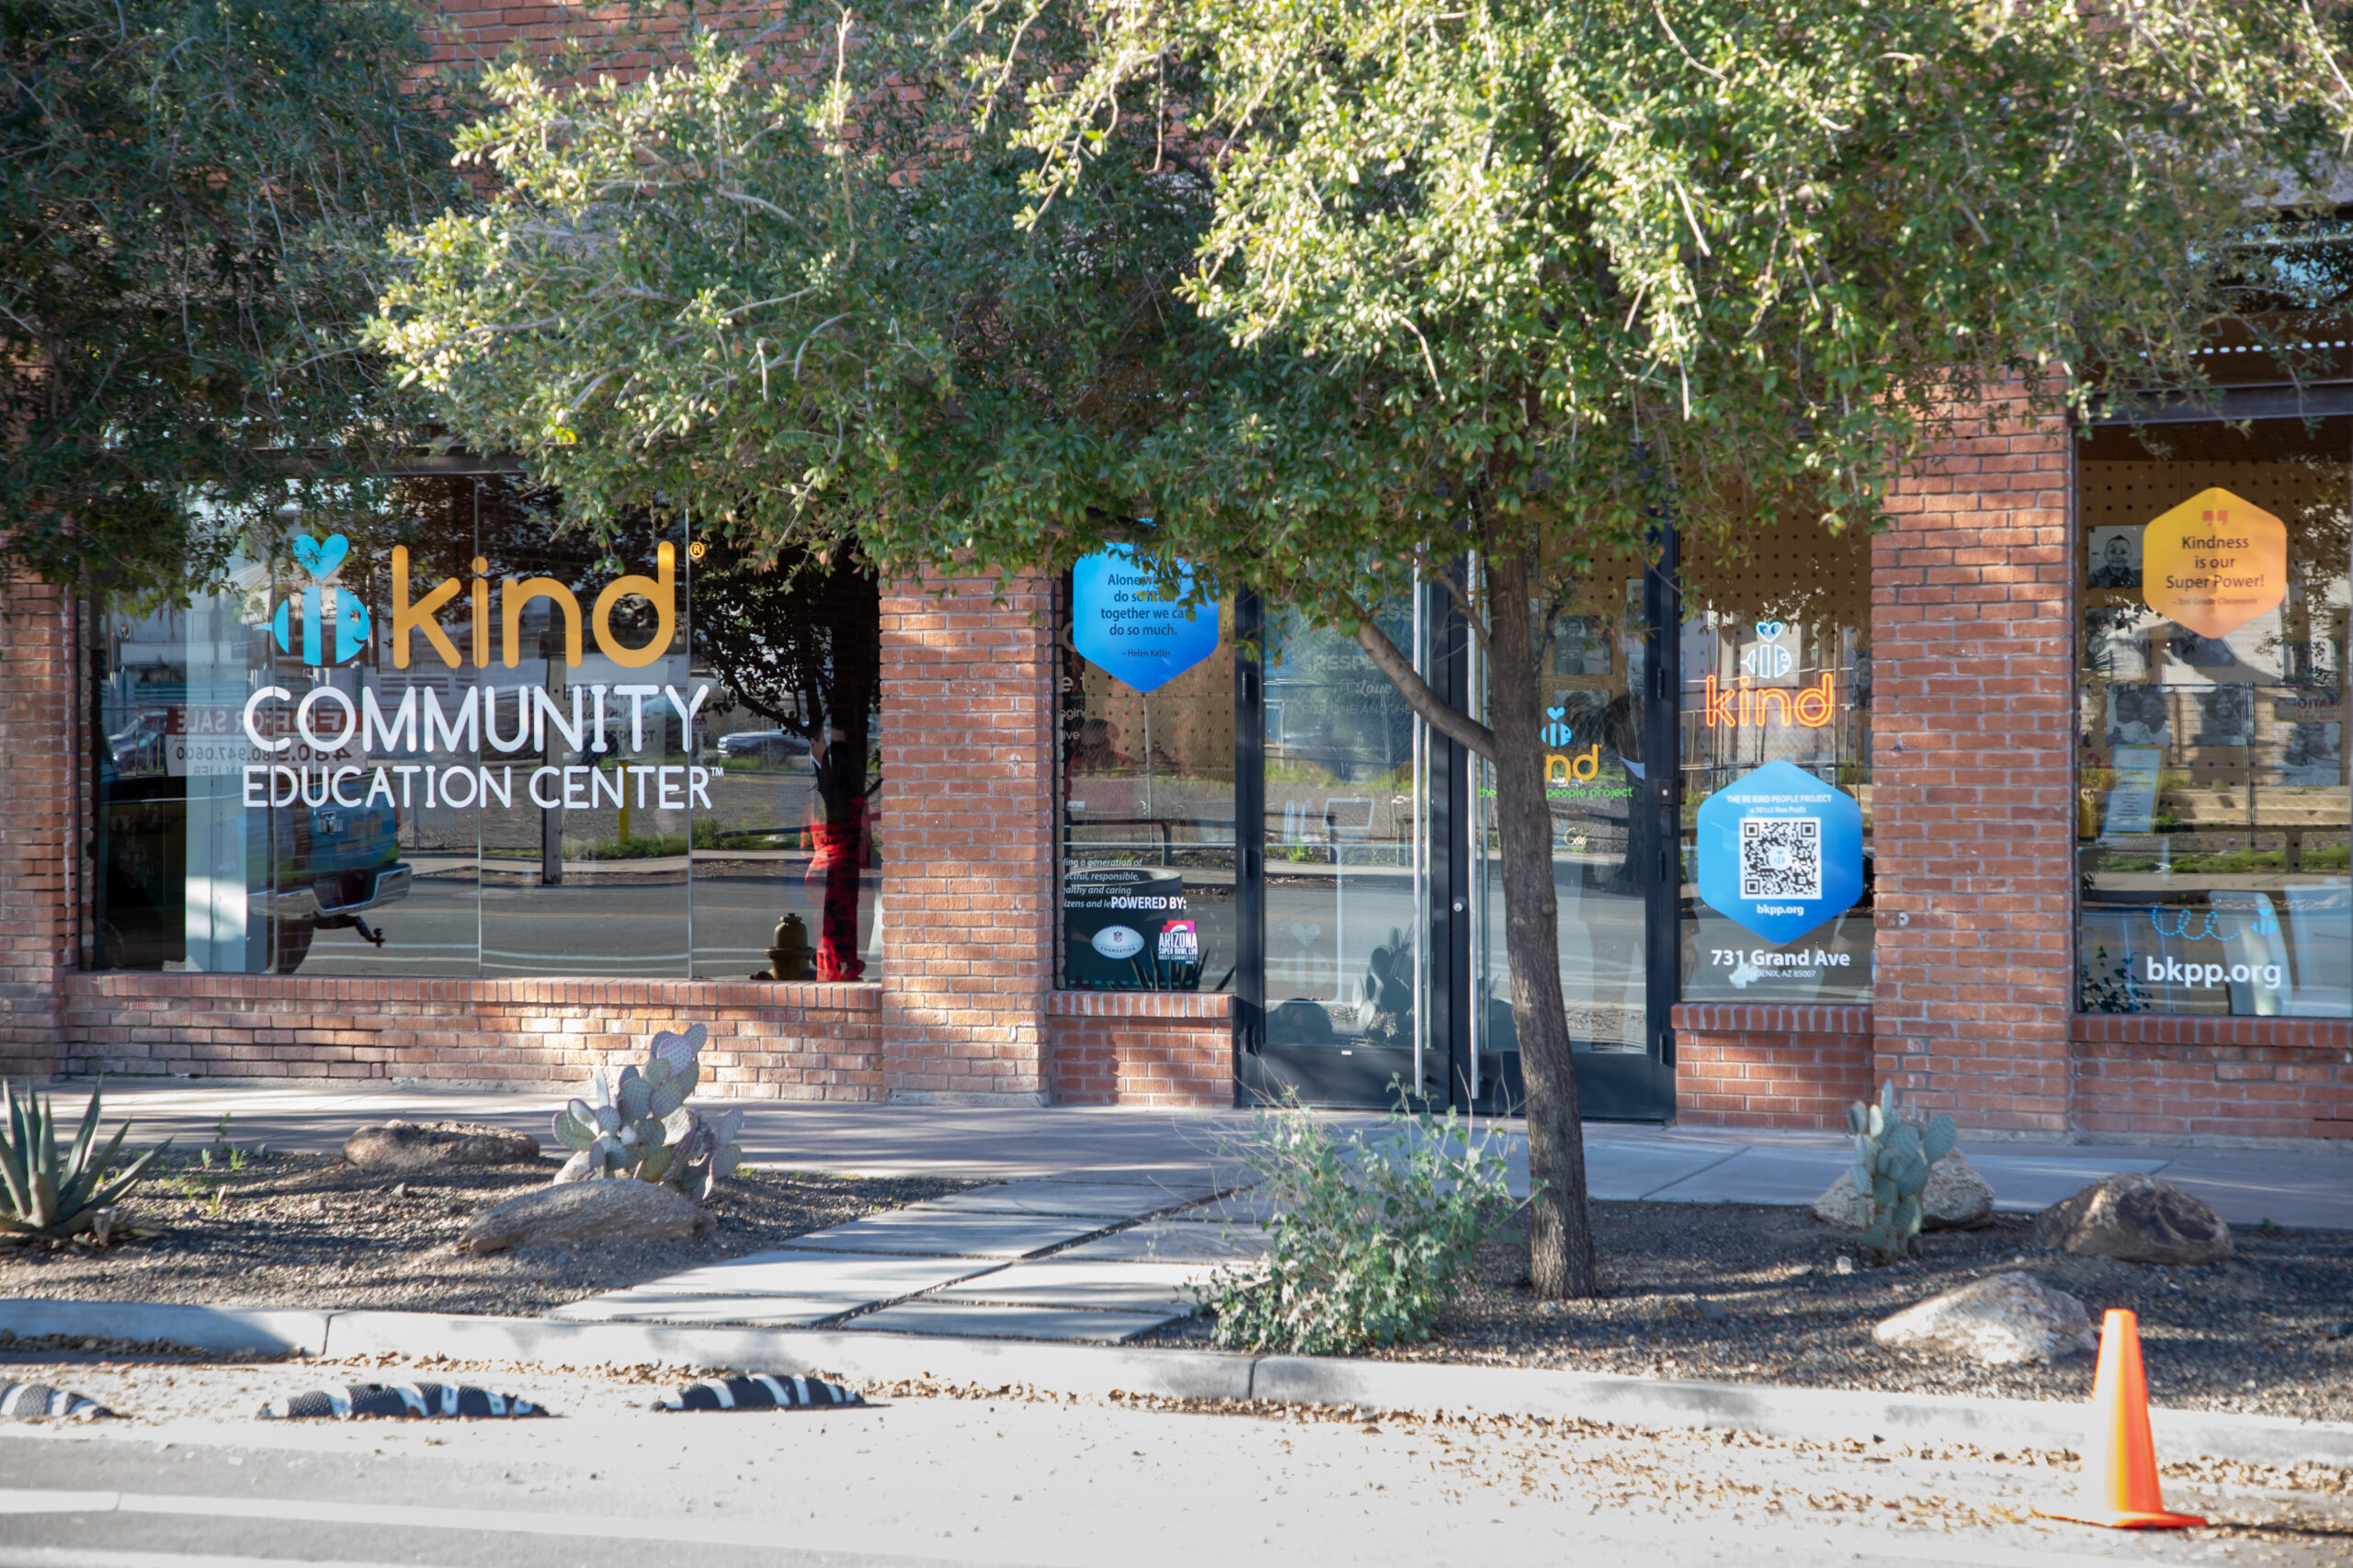 Street View of the BE KIND Community Education Center